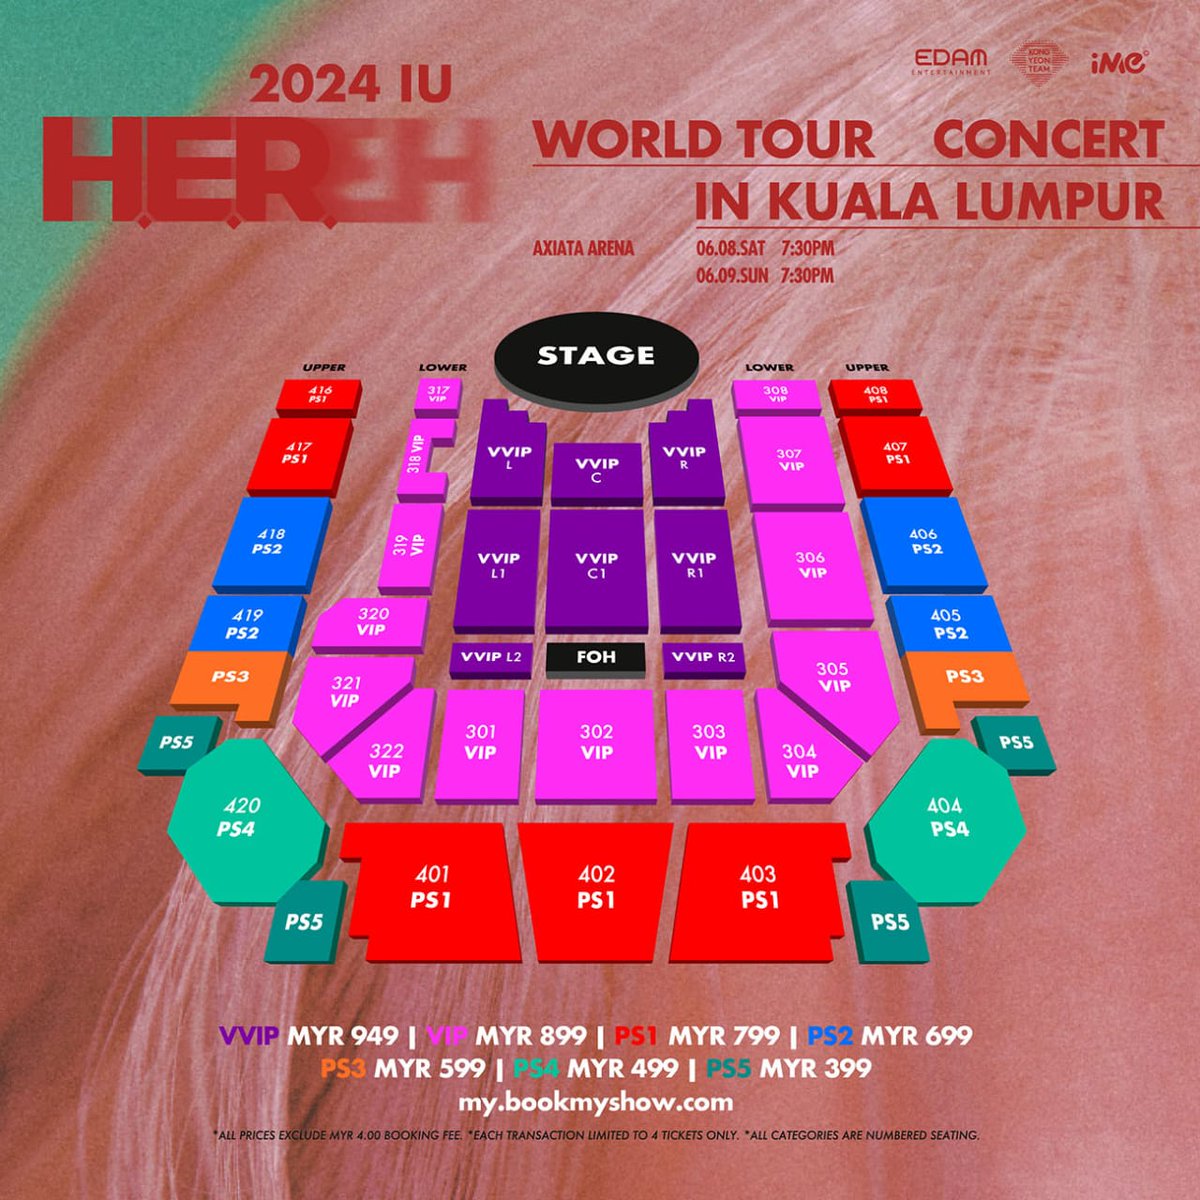 WTS
2 PS1 price - 800MYR each
#IUinKL #HER_WORLD_TOUR_IN_KL